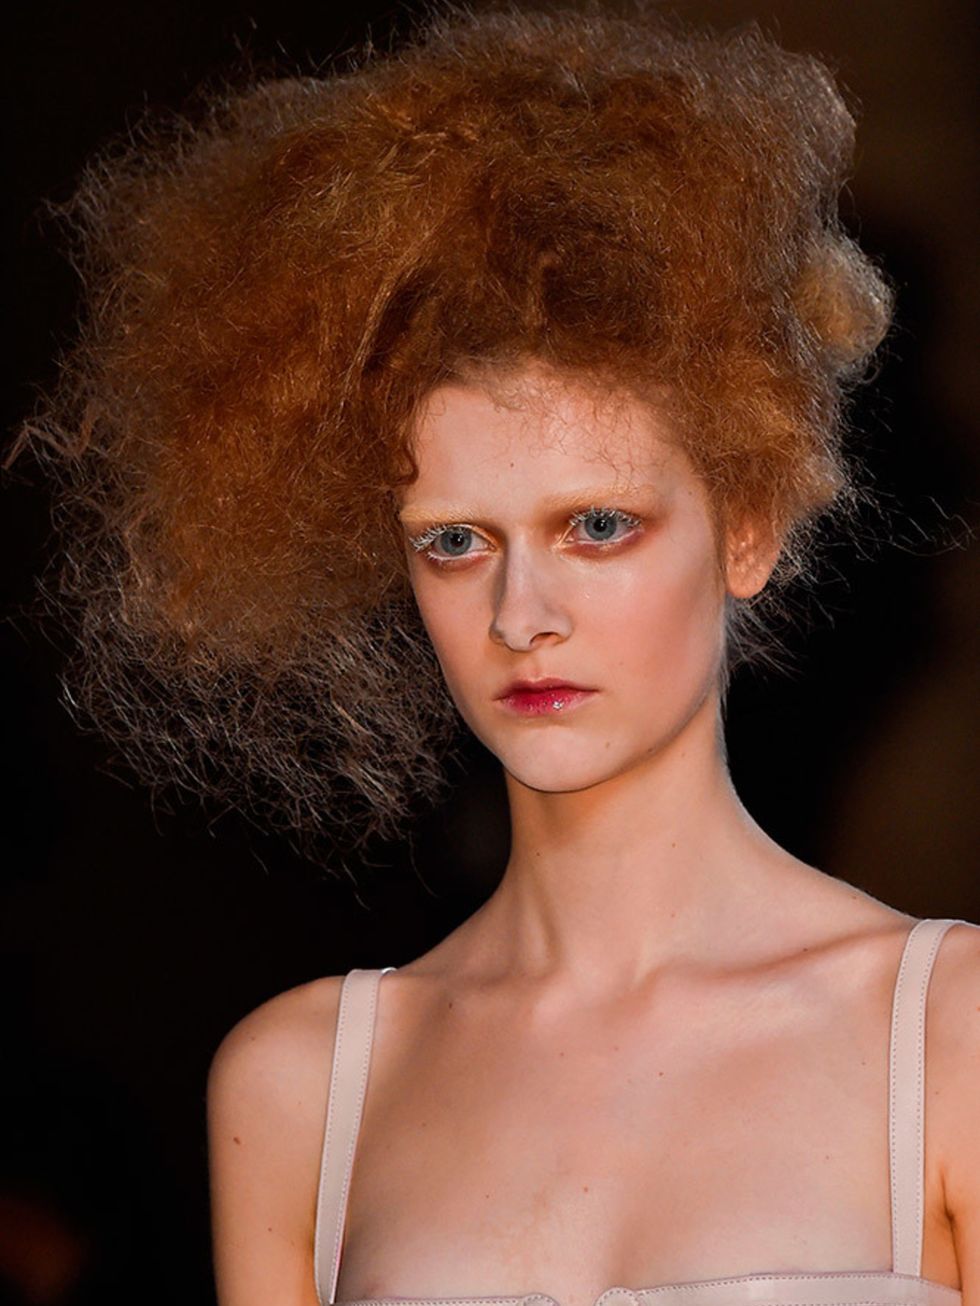 <p><strong><a href="http://www.elleuk.com/catwalk/alexander-mcqueen/autumn-winter-2015">Alexander McQueen</a></strong></p>

<p>The look: Painterly but futuristic</p>

<p>Hair stylist: <a href="http://www.elleuk.com/beauty/the-beauty-experts-you-need-to-kn